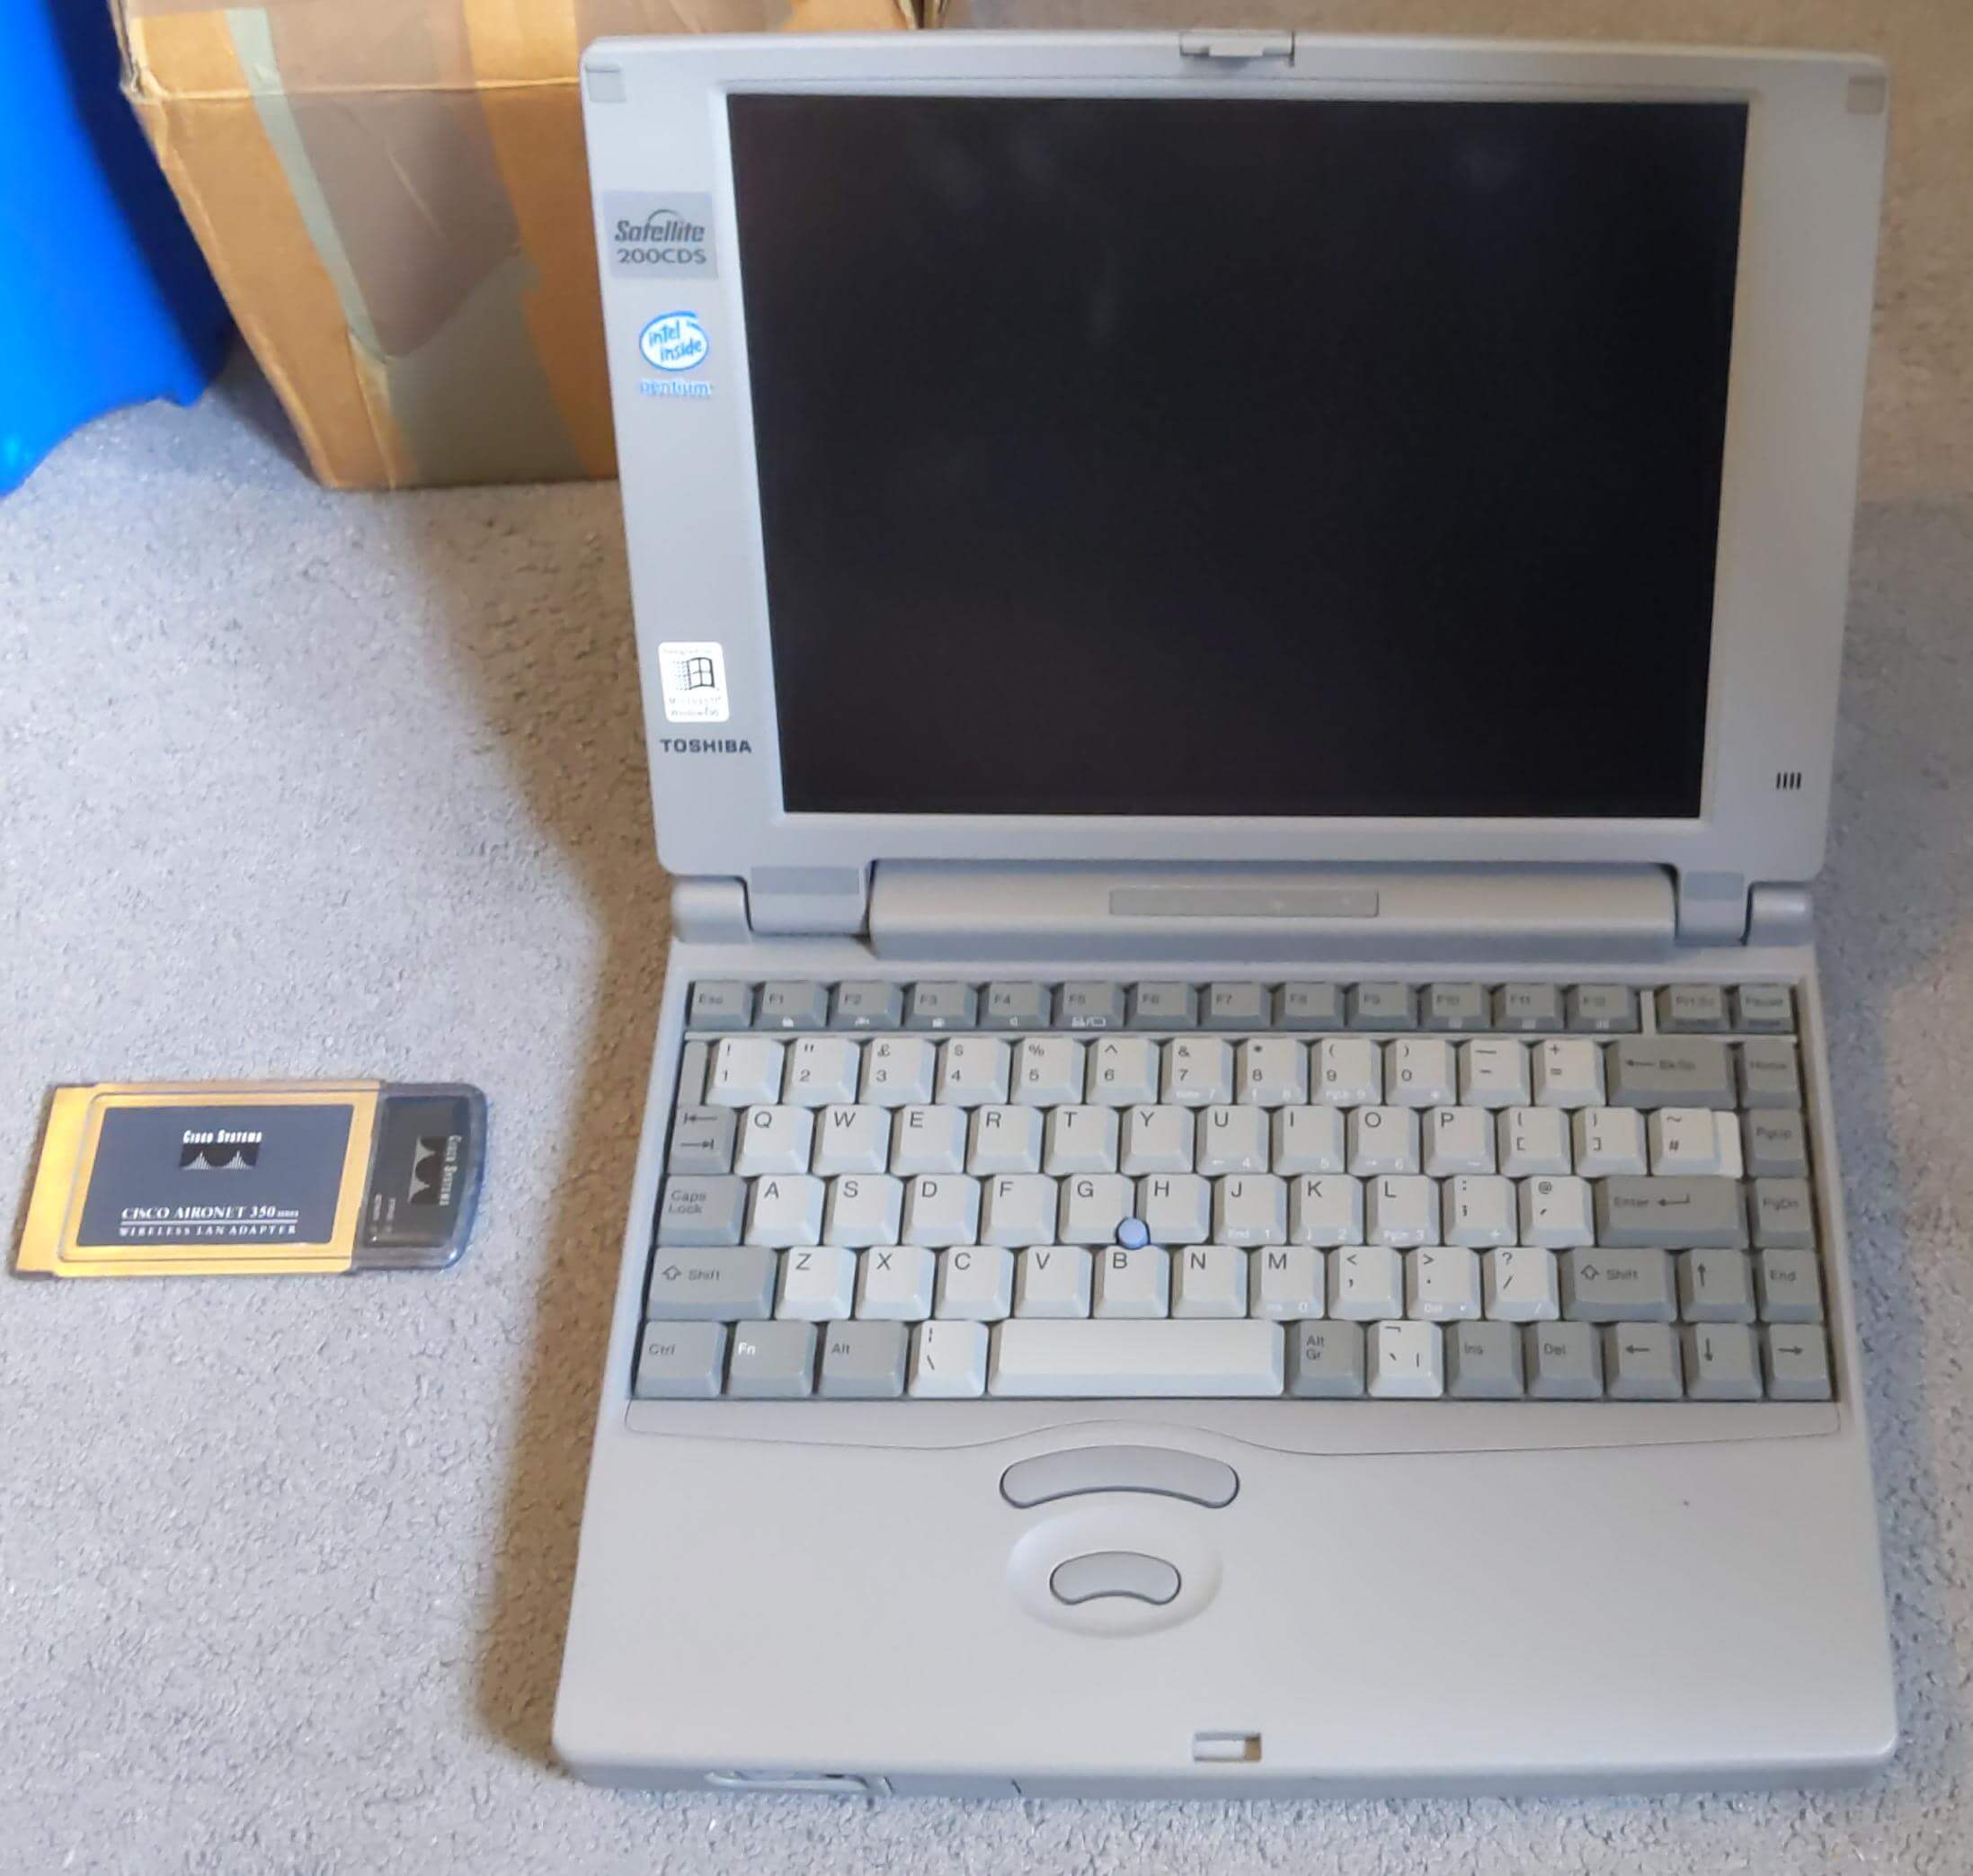 The laptop and the PC card